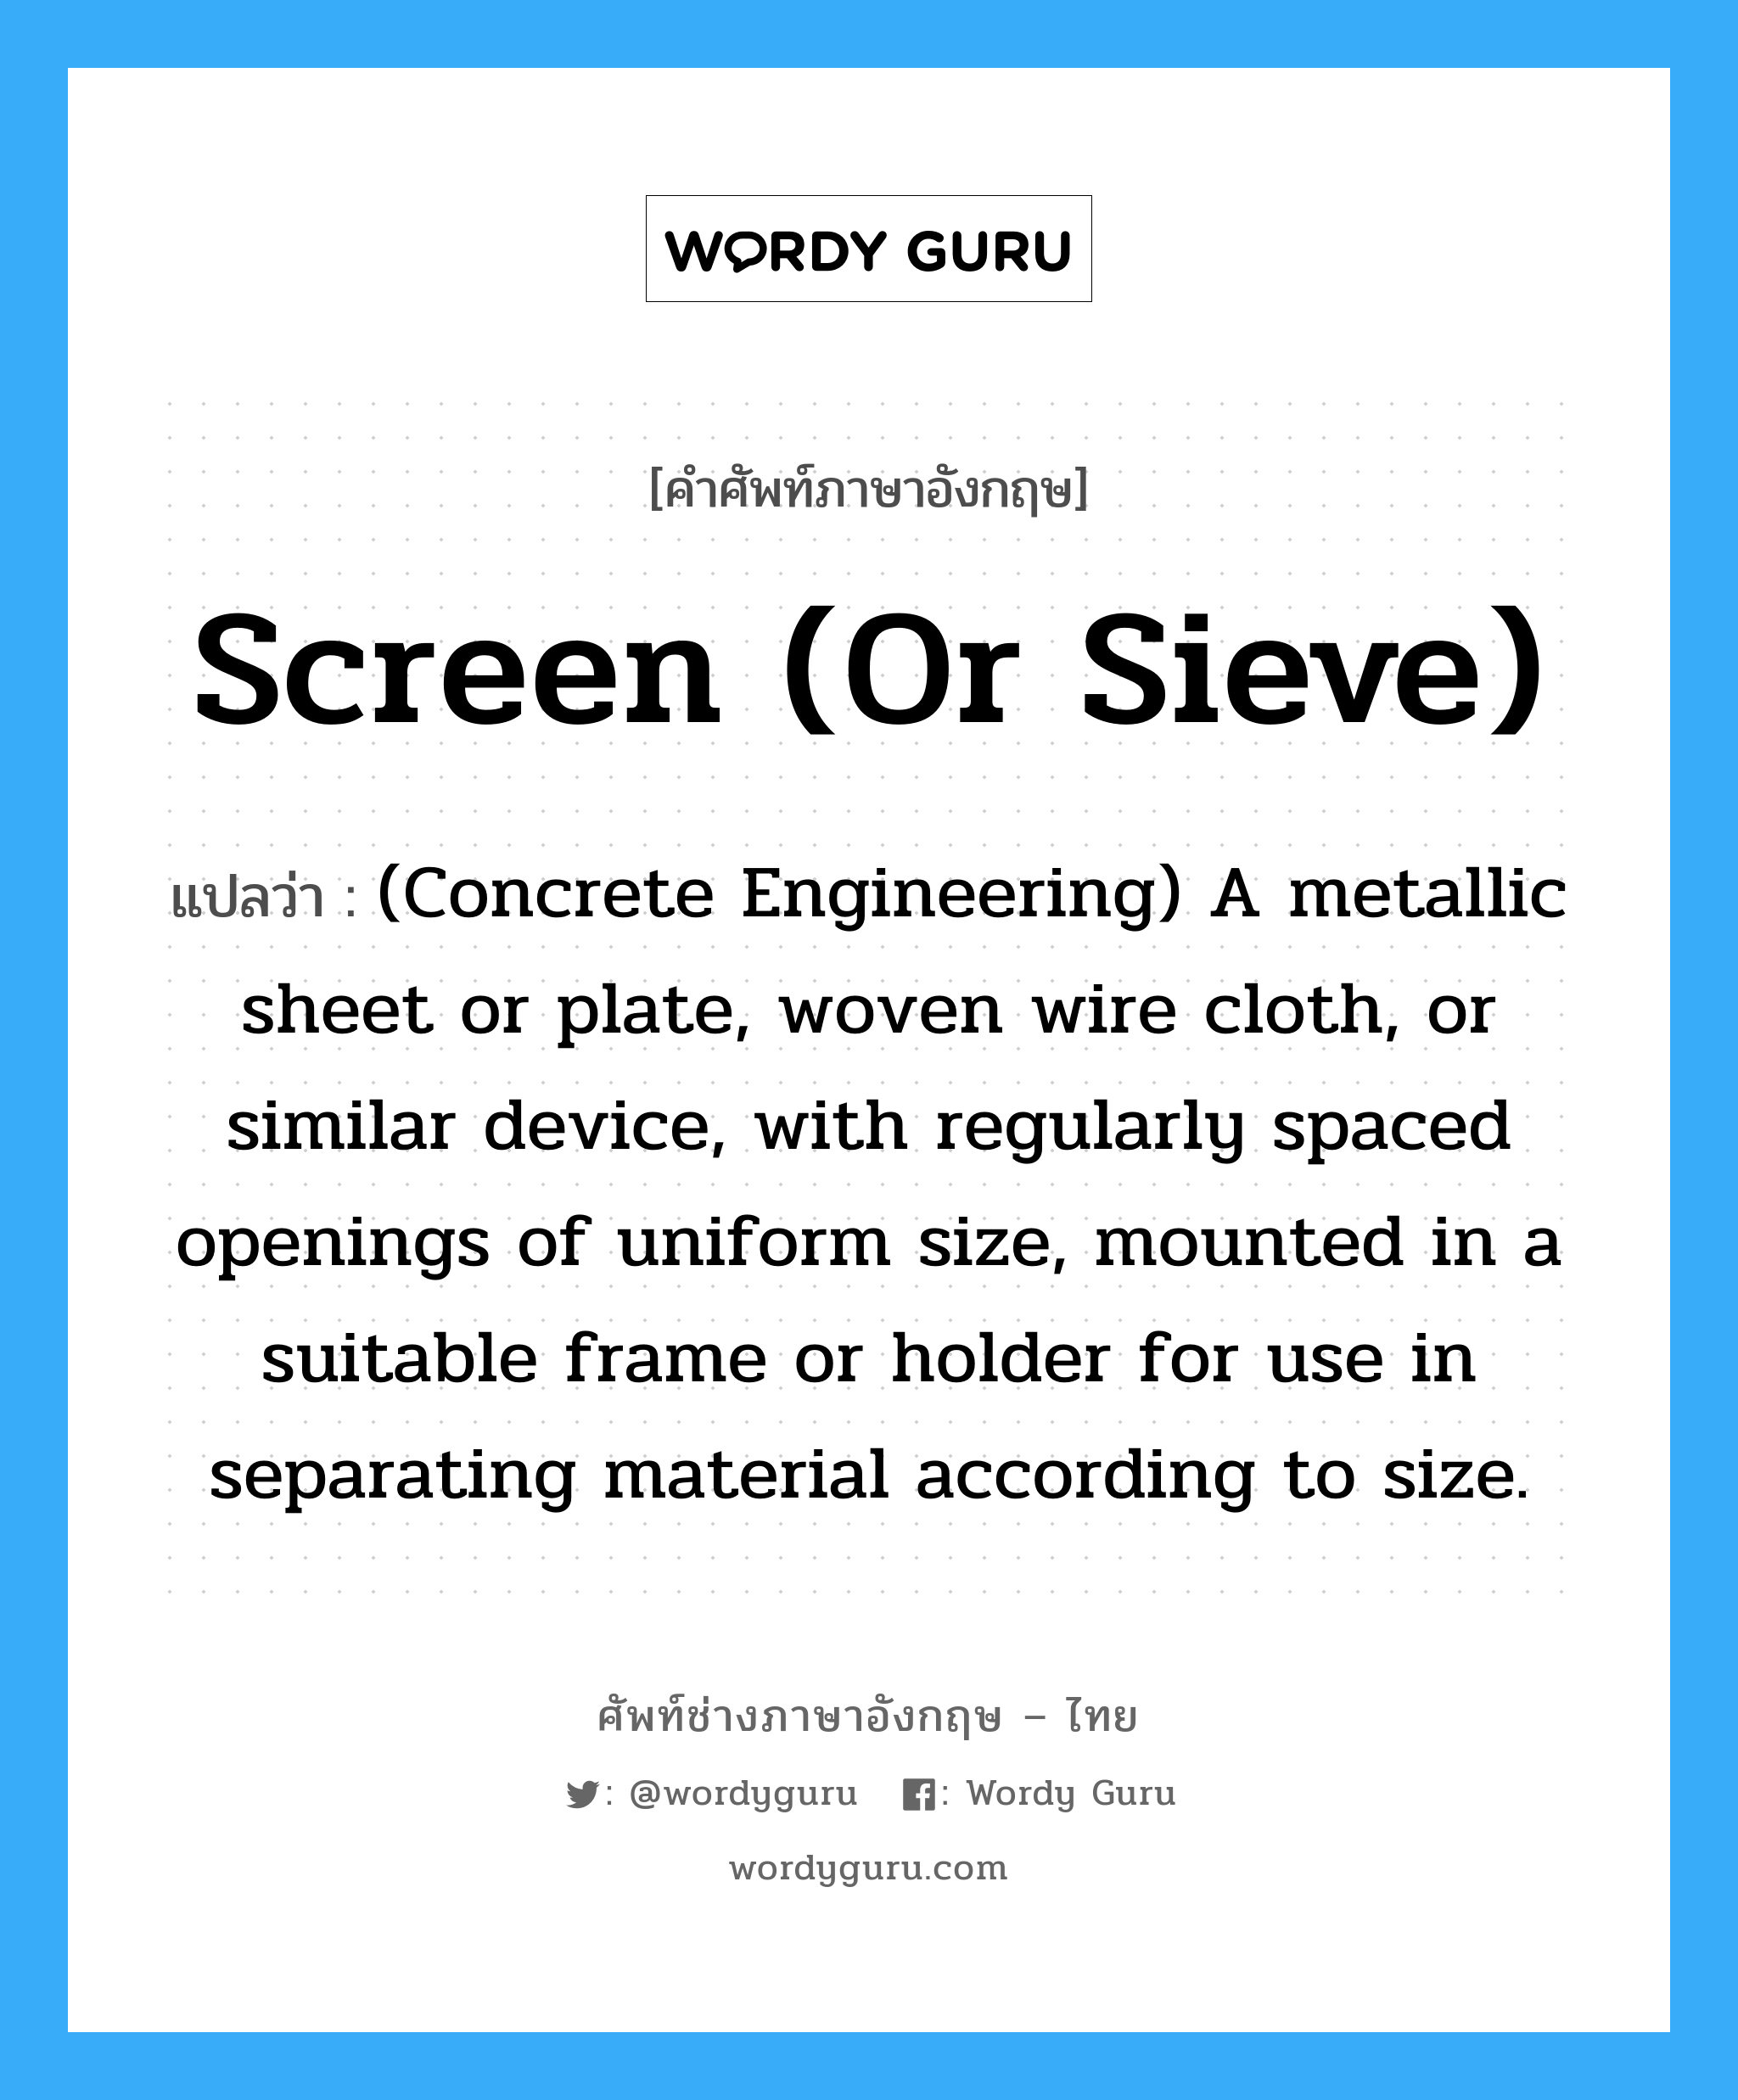 Screen (or Sieve) แปลว่า?, คำศัพท์ช่างภาษาอังกฤษ - ไทย Screen (or Sieve) คำศัพท์ภาษาอังกฤษ Screen (or Sieve) แปลว่า (Concrete Engineering) A metallic sheet or plate, woven wire cloth, or similar device, with regularly spaced openings of uniform size, mounted in a suitable frame or holder for use in separating material according to size.